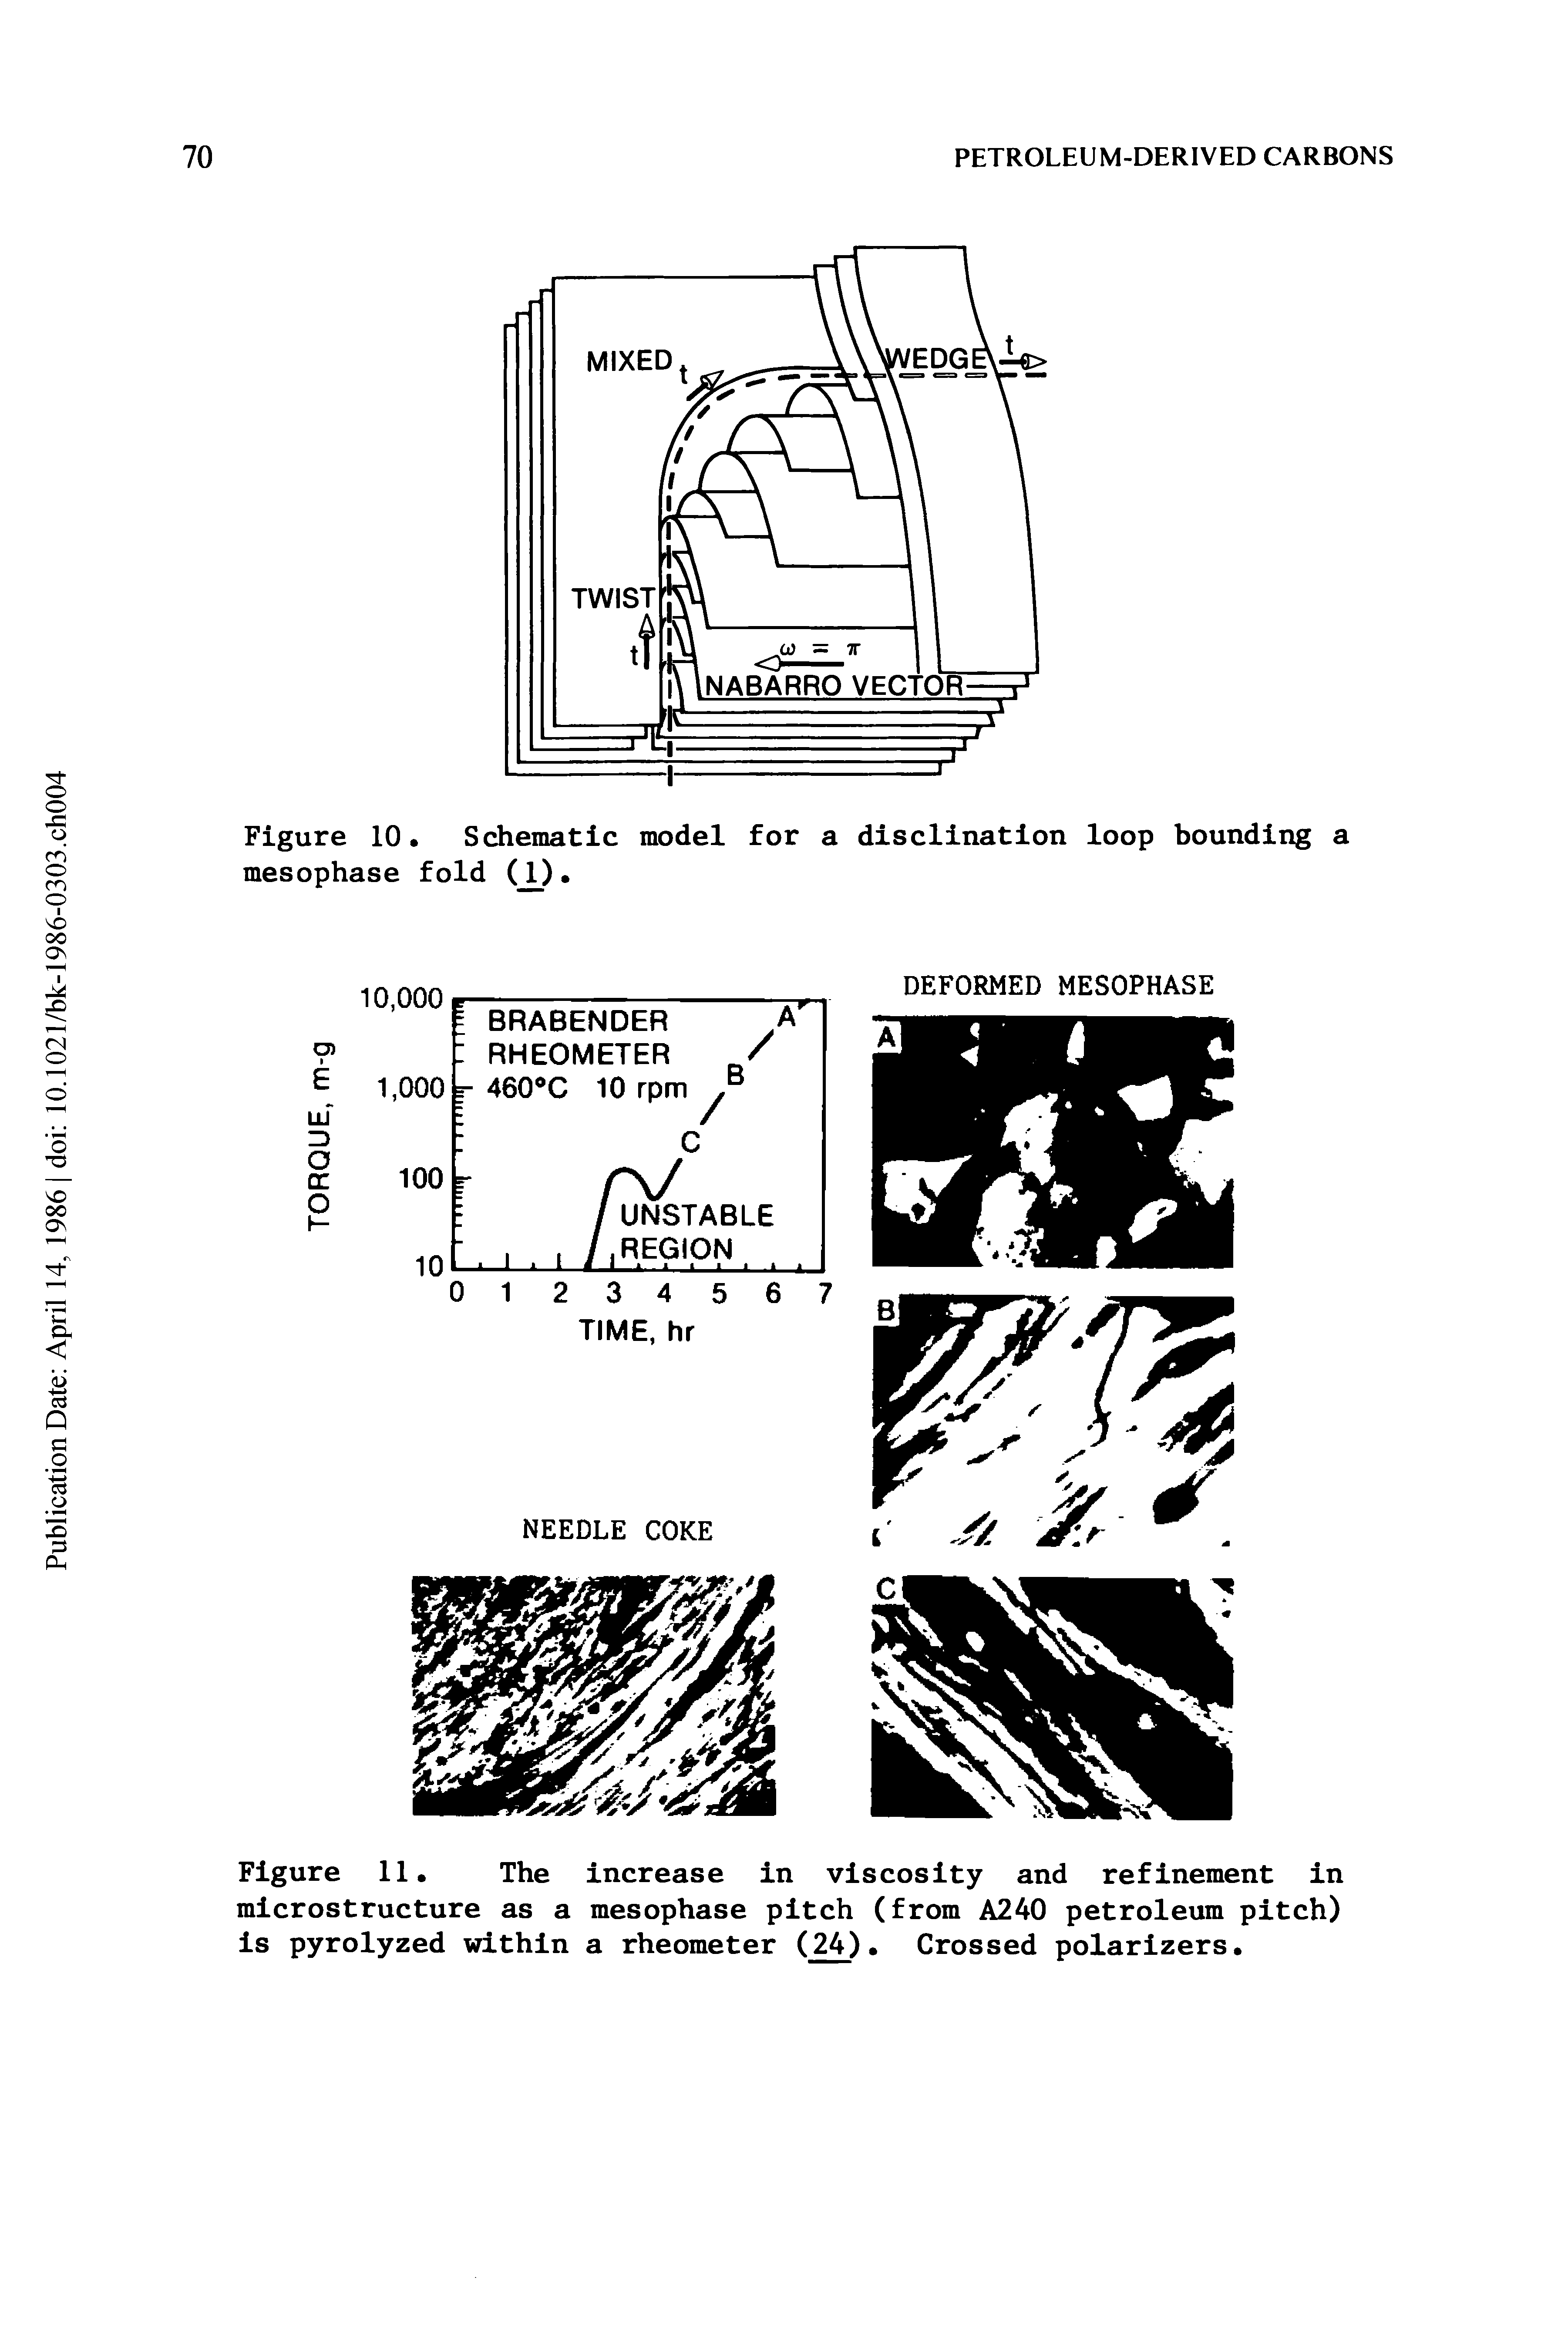 Figure 11. The increase in viscosity and refinement in microstructure as a mesophase pitch (from A240 petroleum pitch) is pyrolyzed within a rheometer (24). Crossed polarizers.